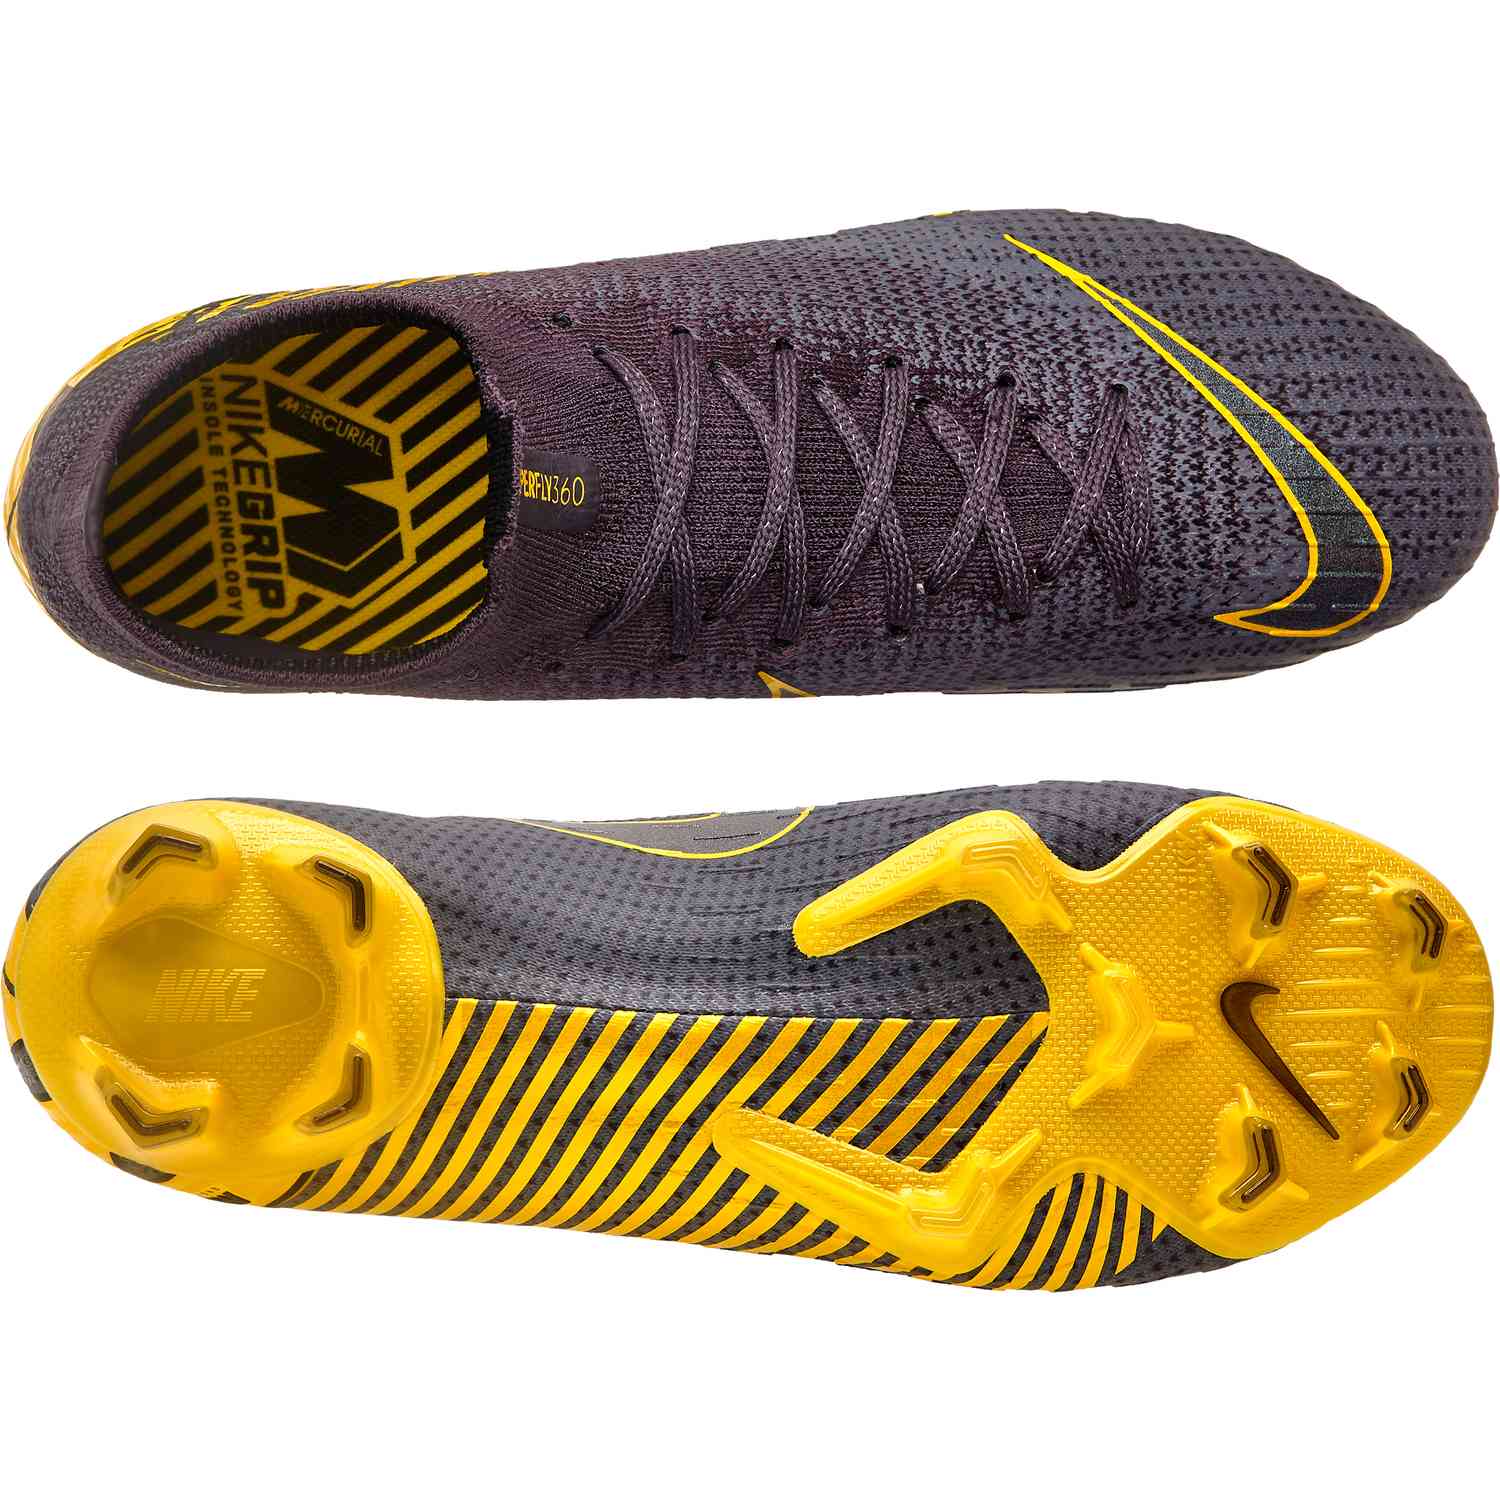 mercurial nike grip insole technology